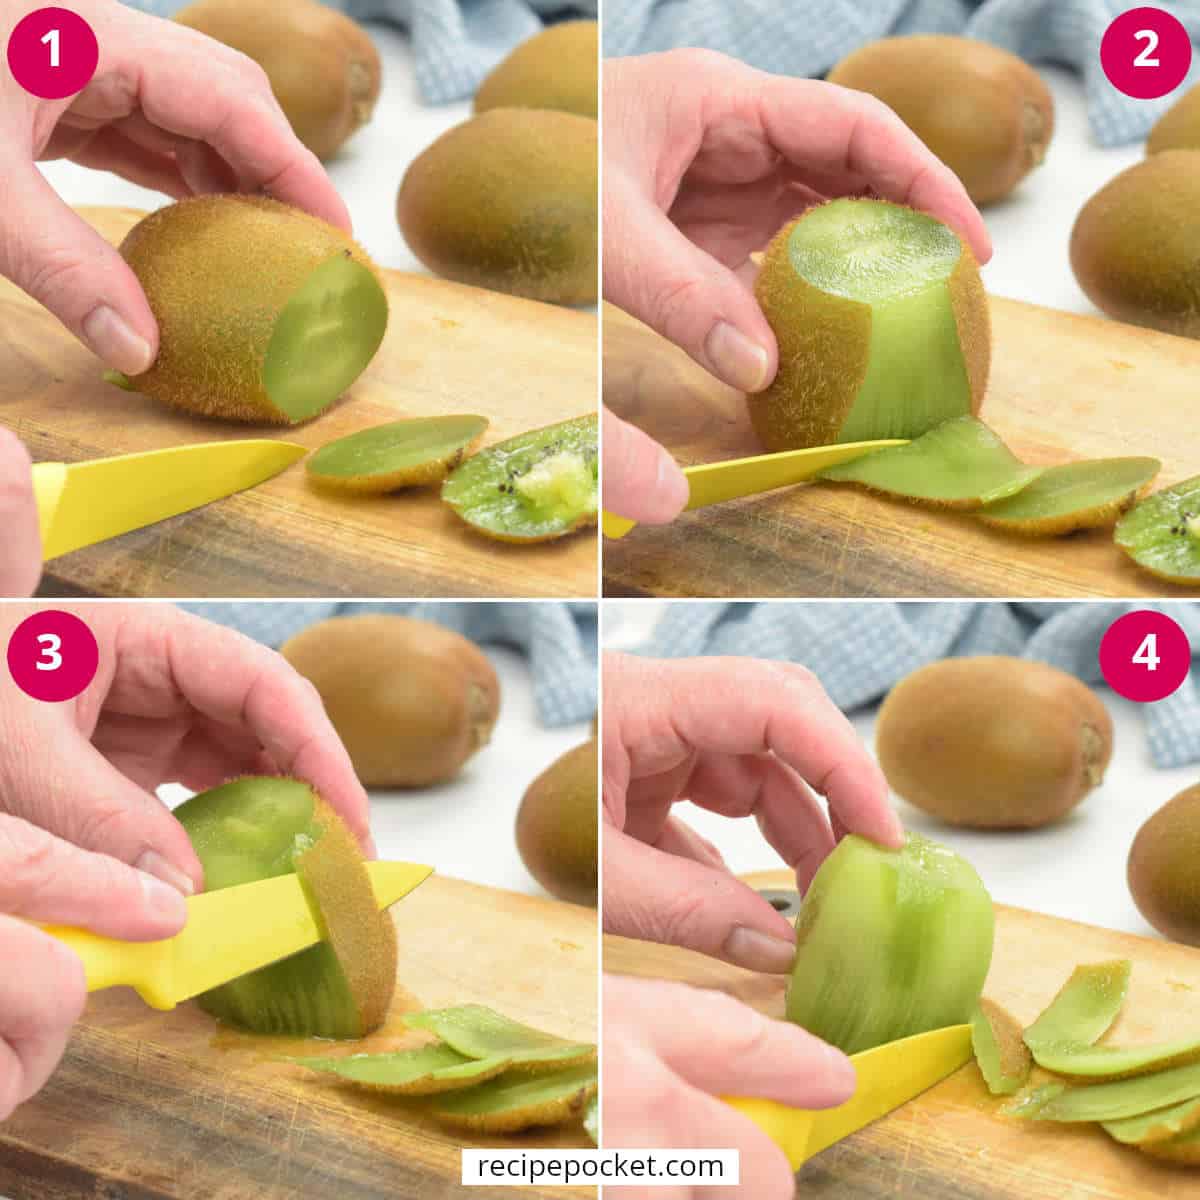 A four part image showing how to peel a kiwi fruit with a knife.